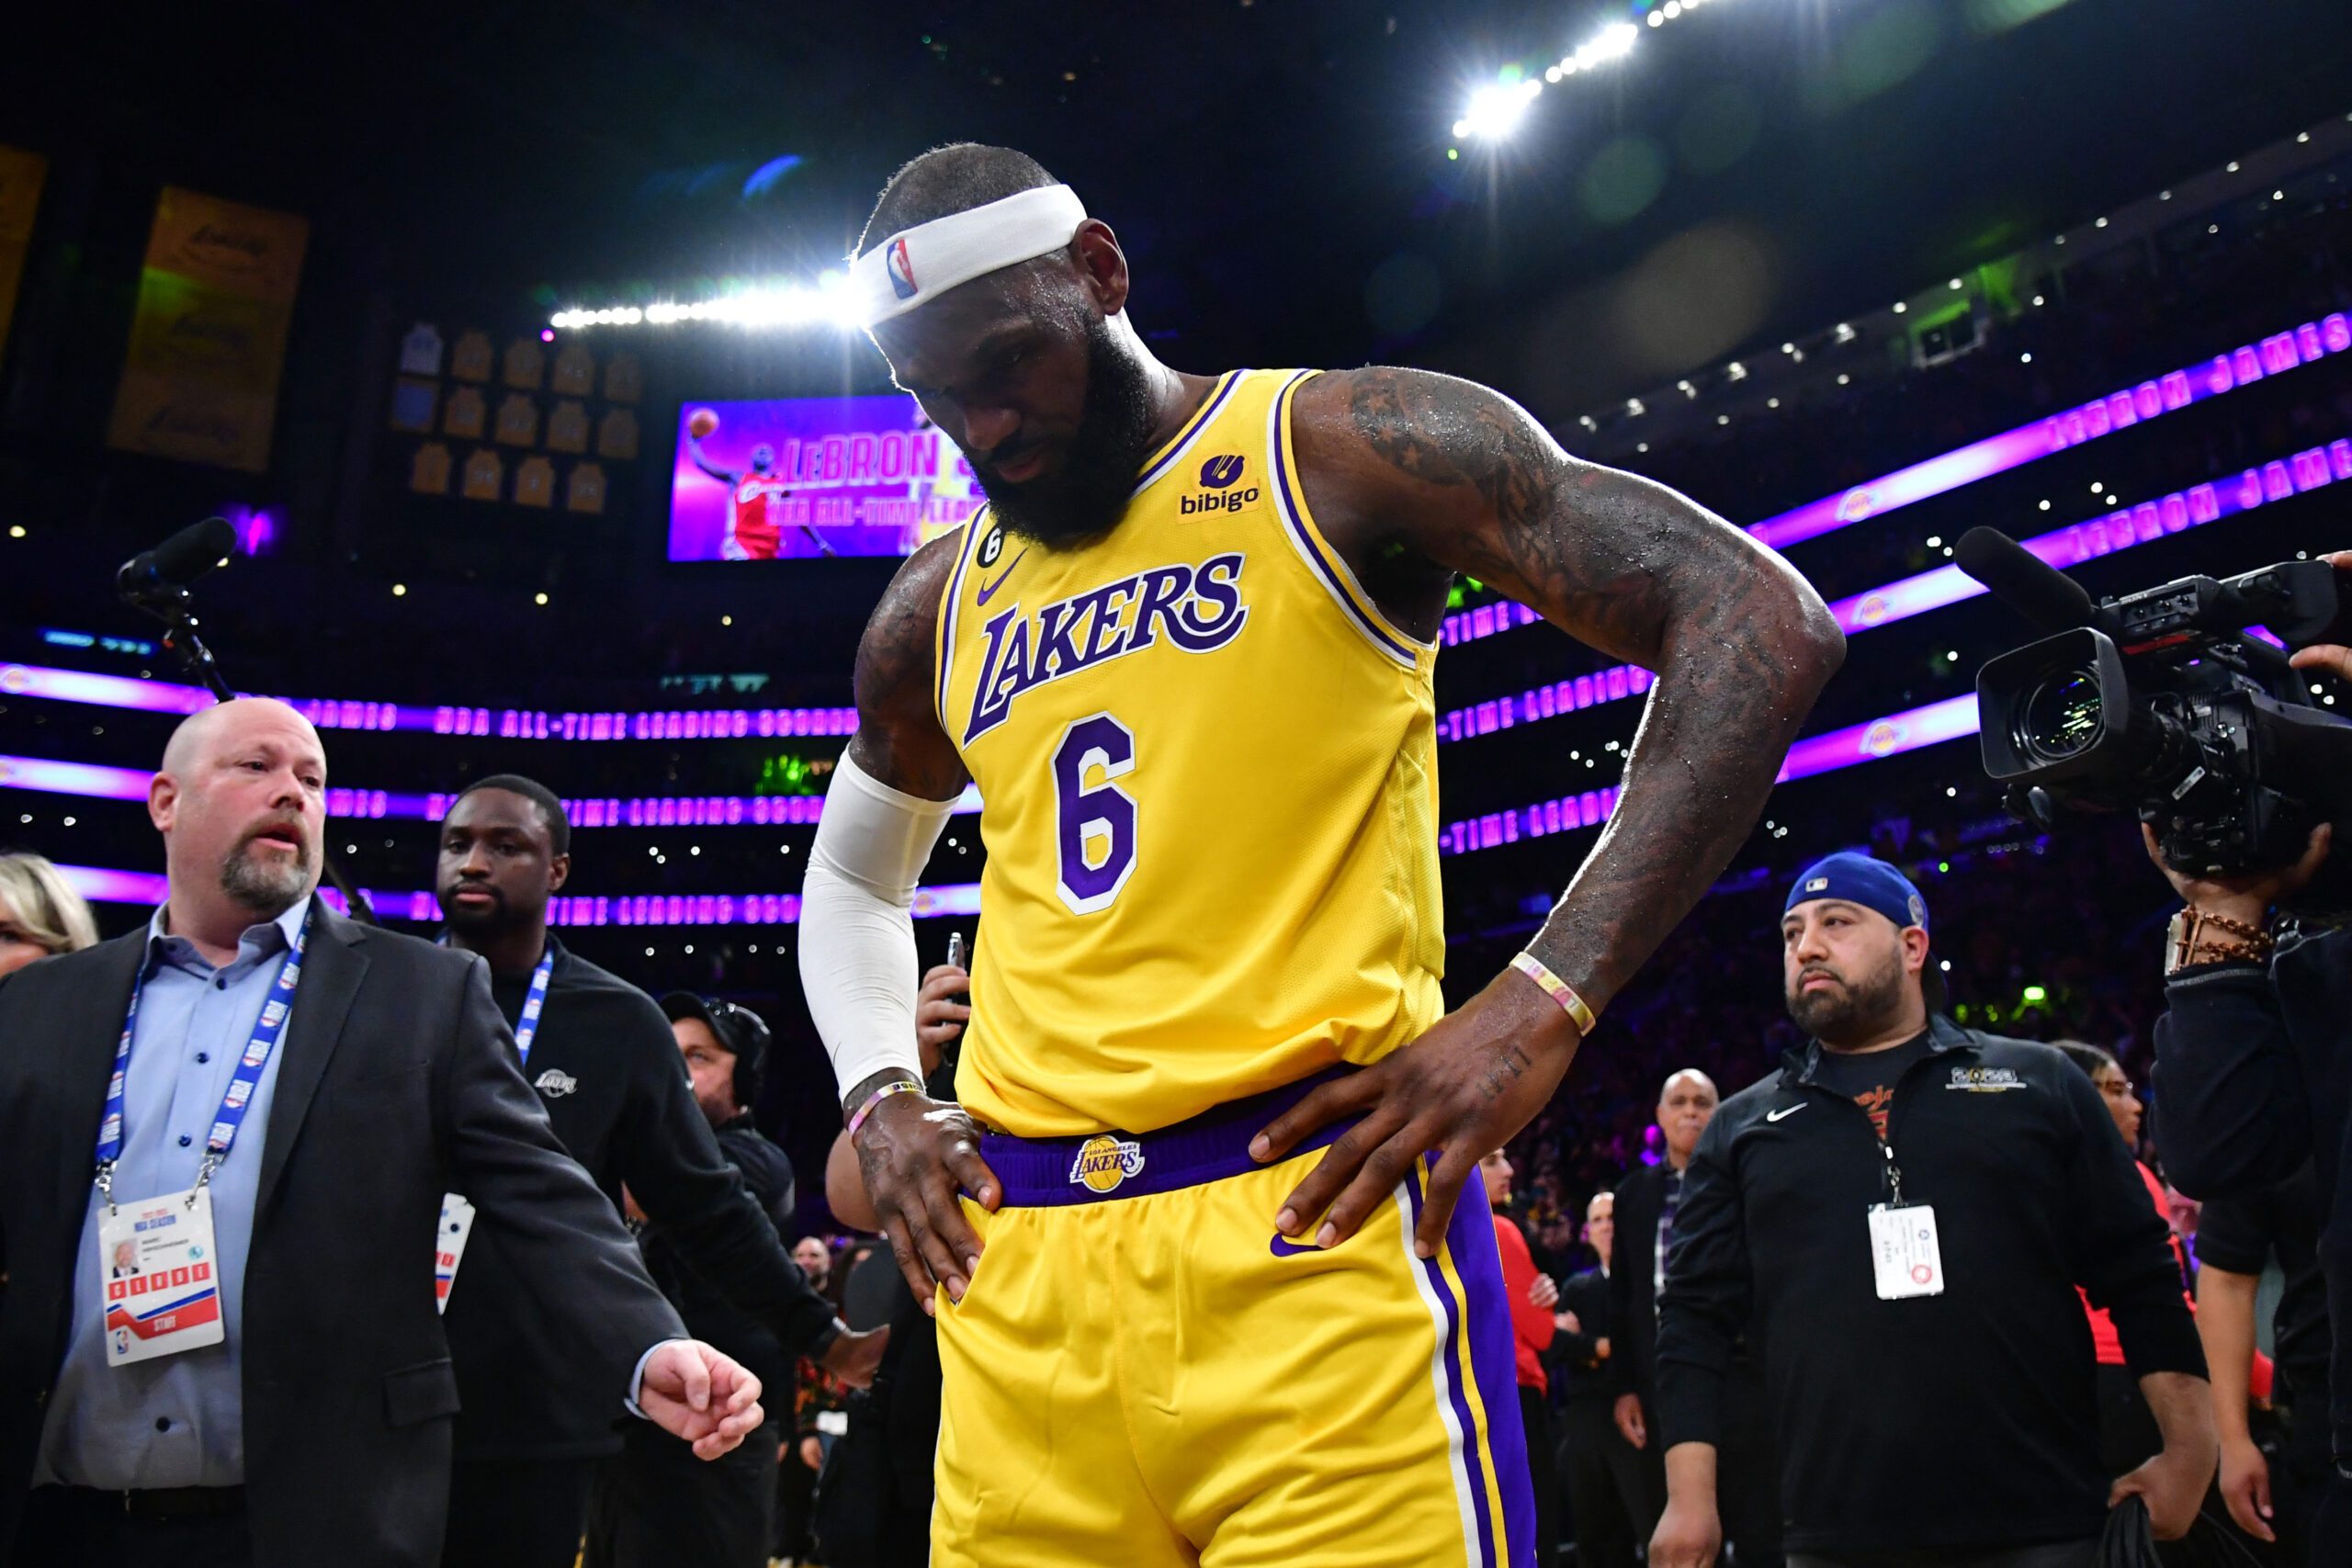 No more year 21? LeBron James mum about future after Lakers’ playoff defeat